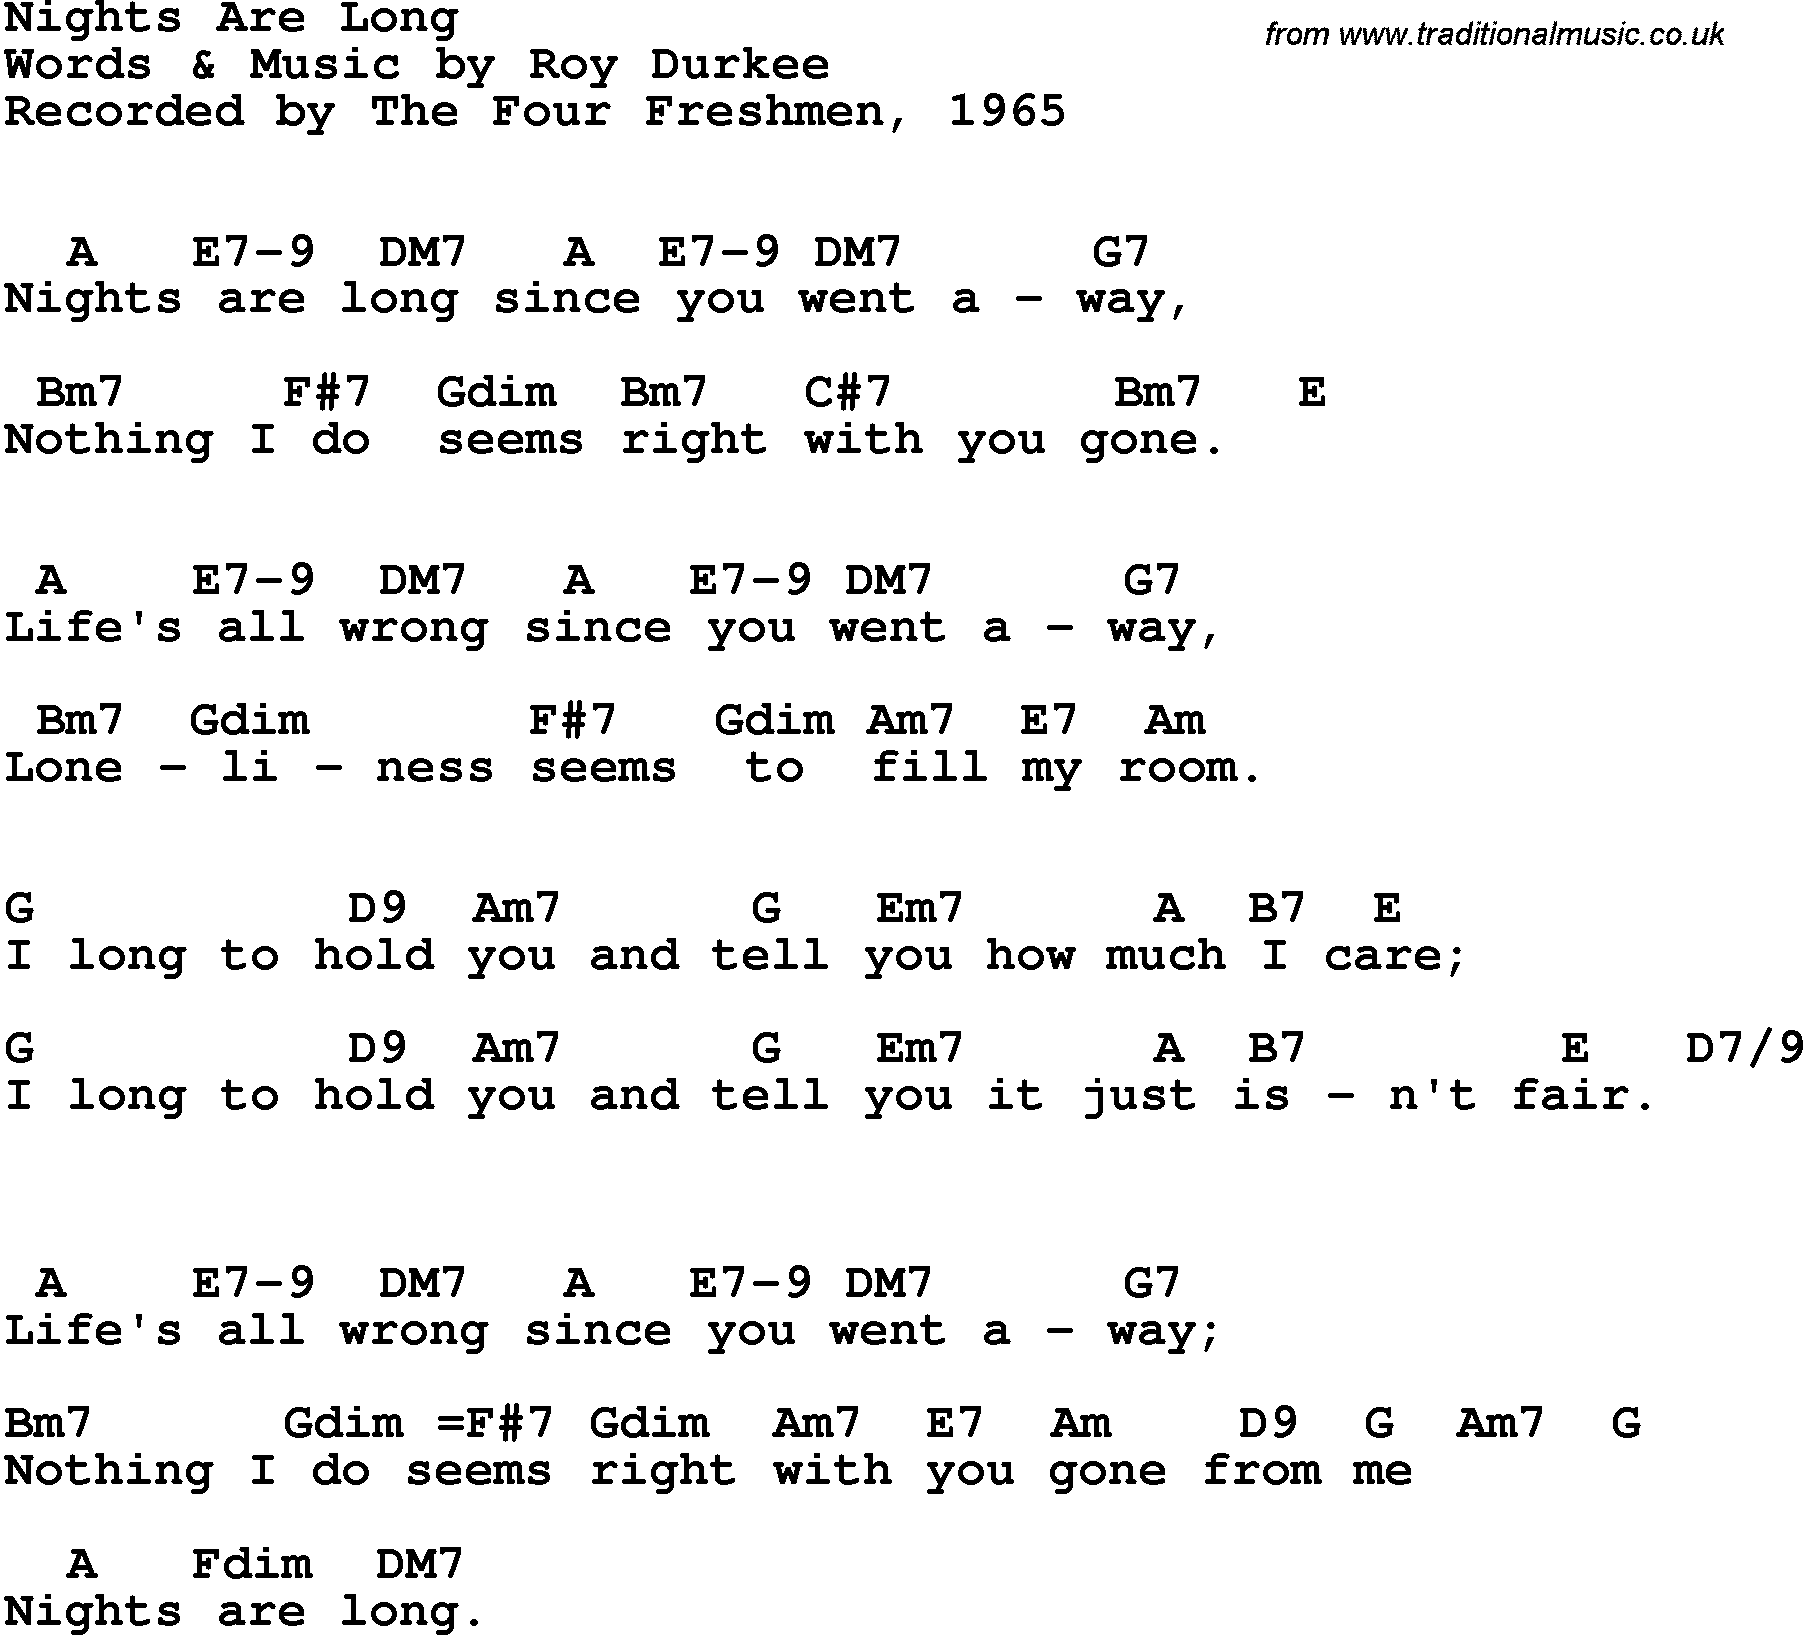 Song Lyrics with guitar chords for Nights Are Long - Four Freshmen, 1965